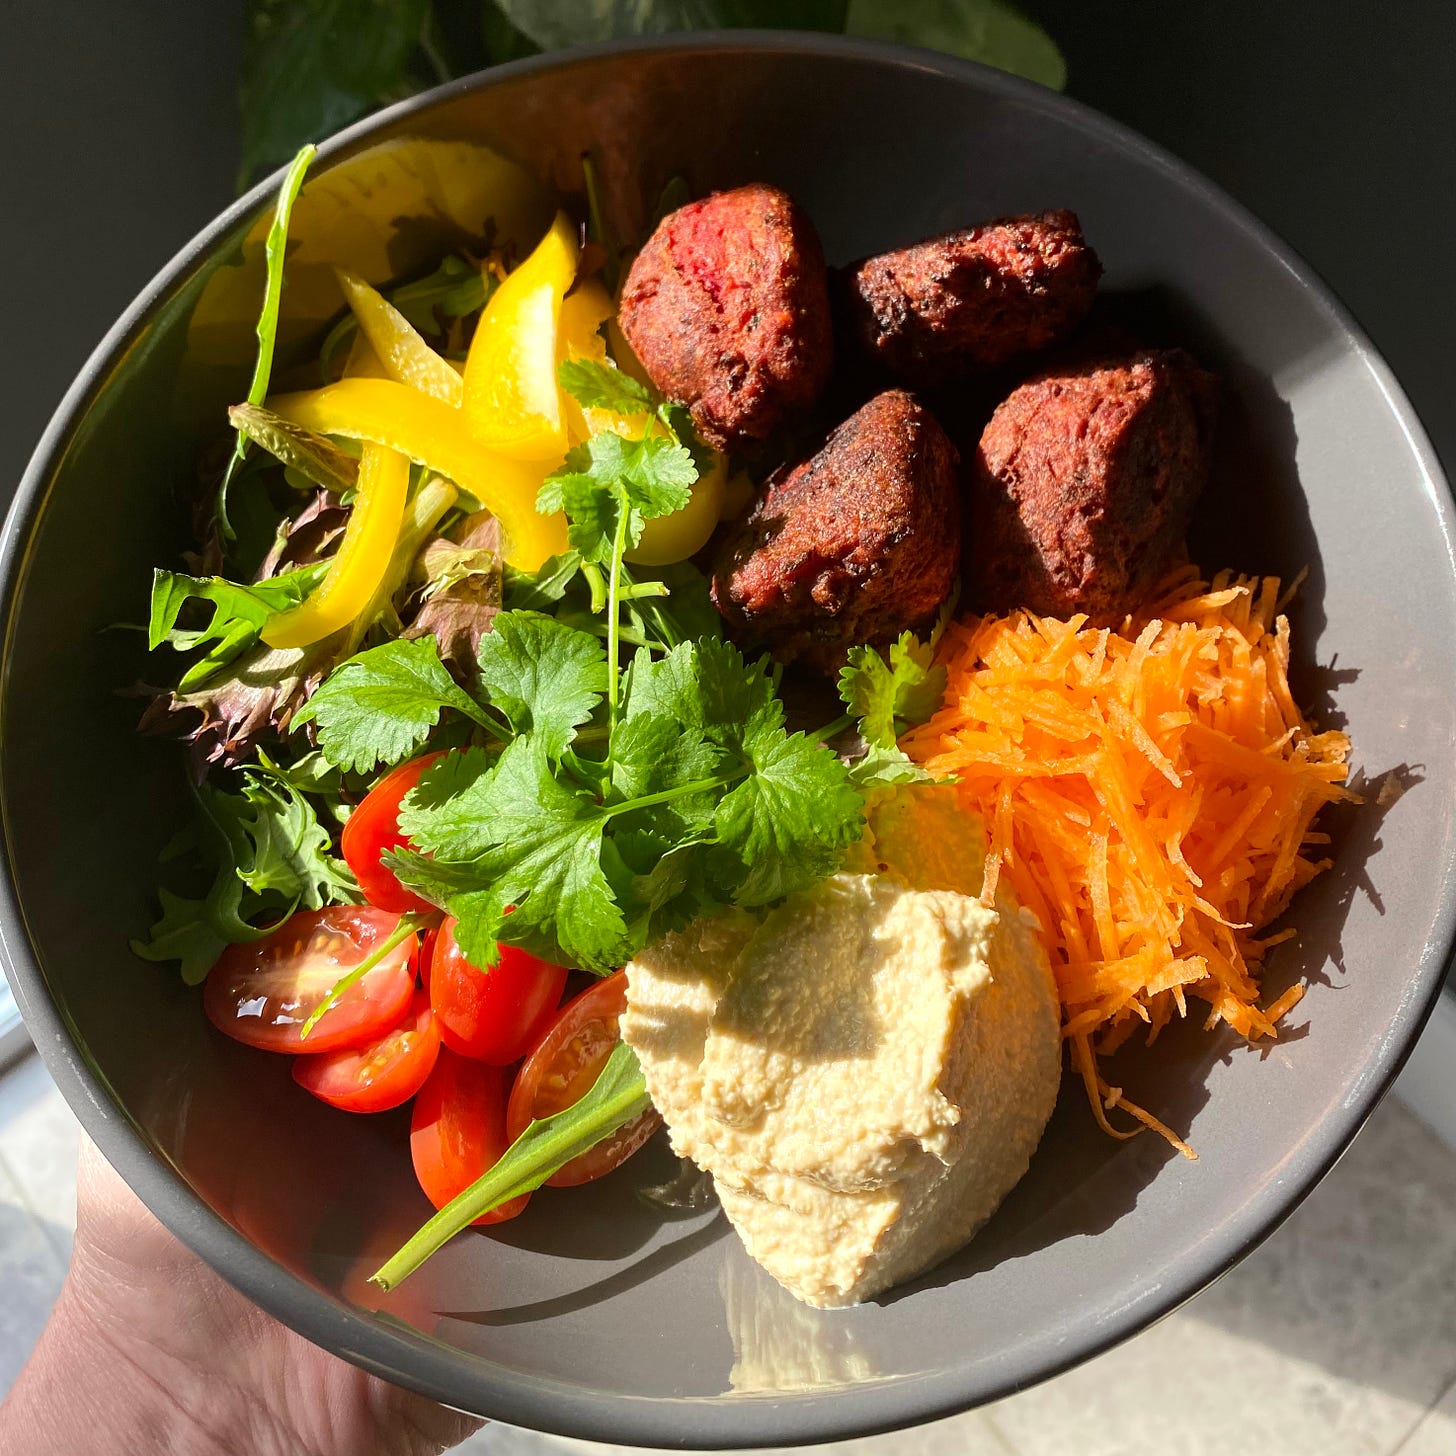 Bowl of falafel, peppers, carrot, tomato, lettuce and houmous